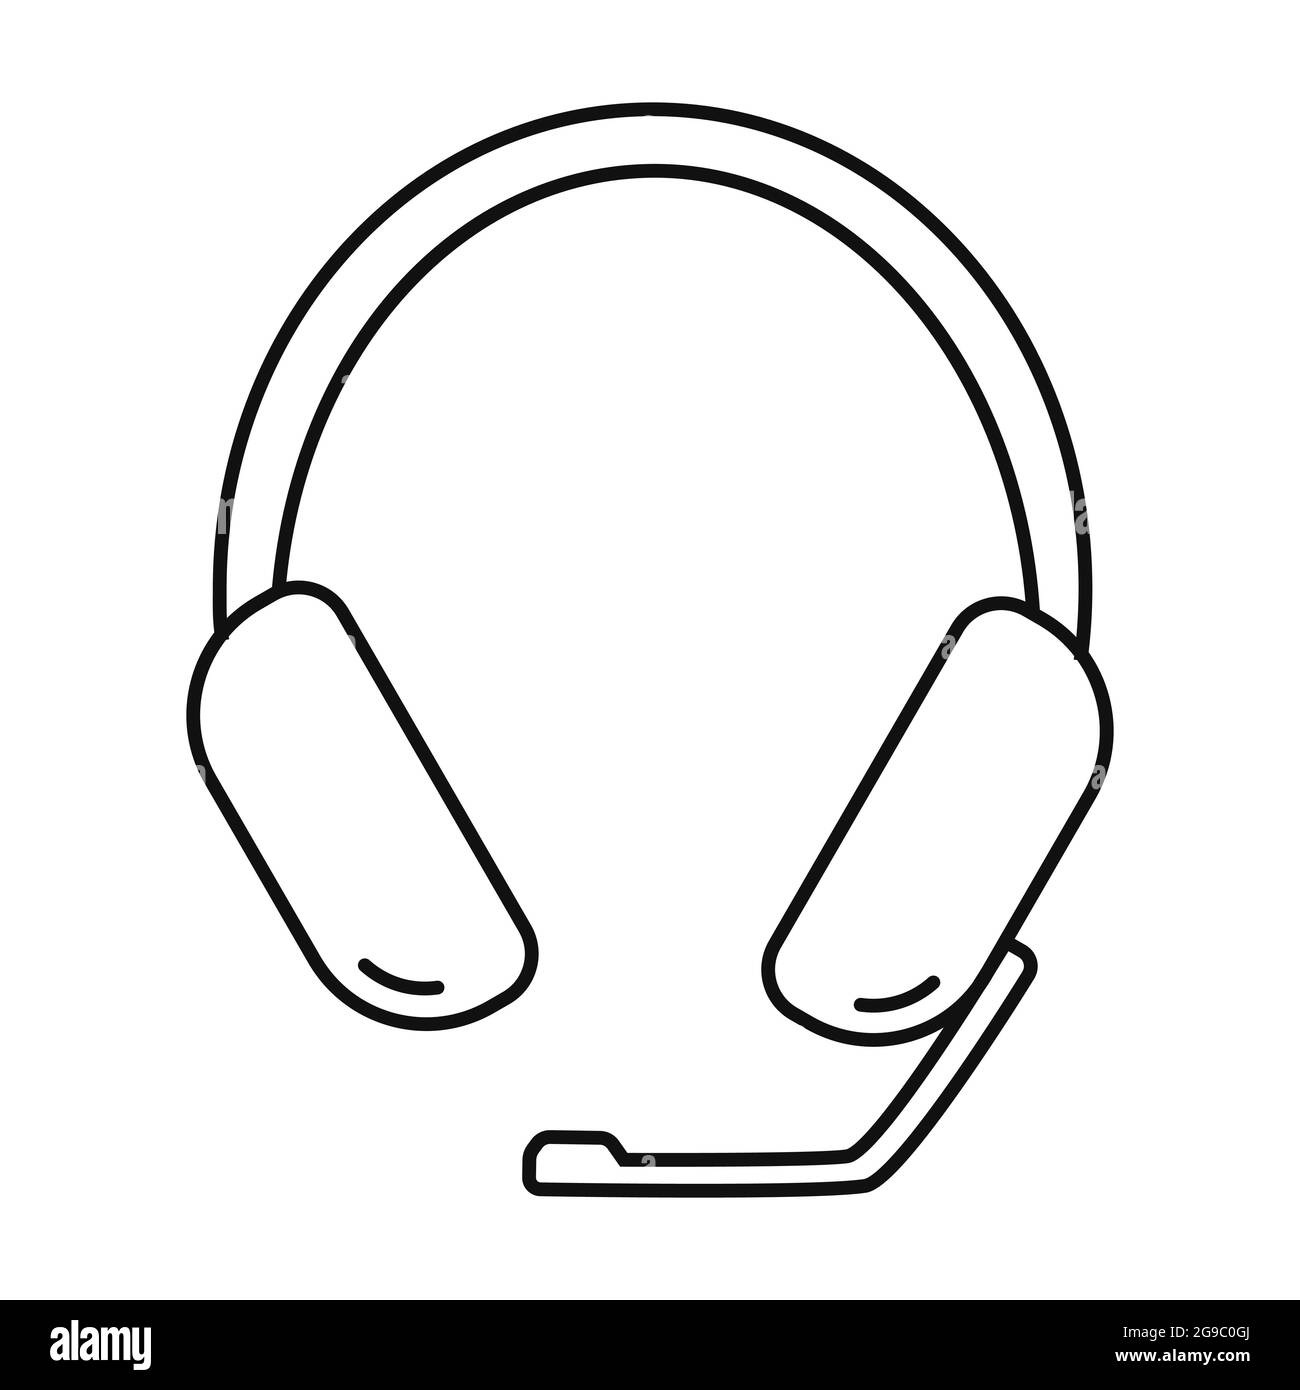 Headset line vector icon. Headphones with microphone. Simple vector illustration isolated on white background Stock Vector